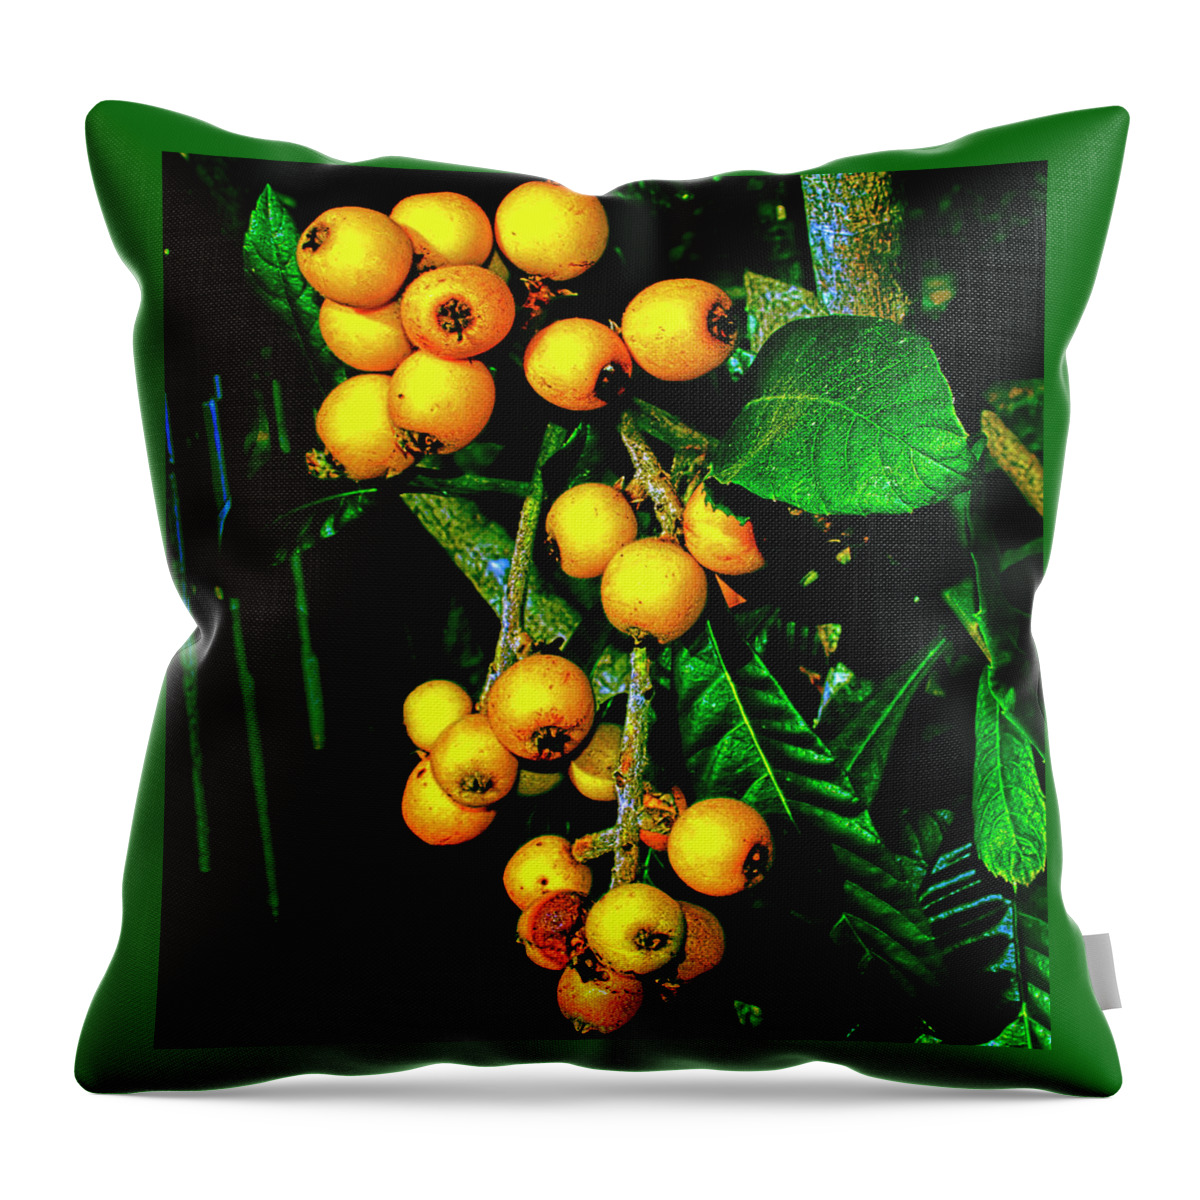 Loquats Throw Pillow featuring the photograph Ripe Loquats by Gina O'Brien